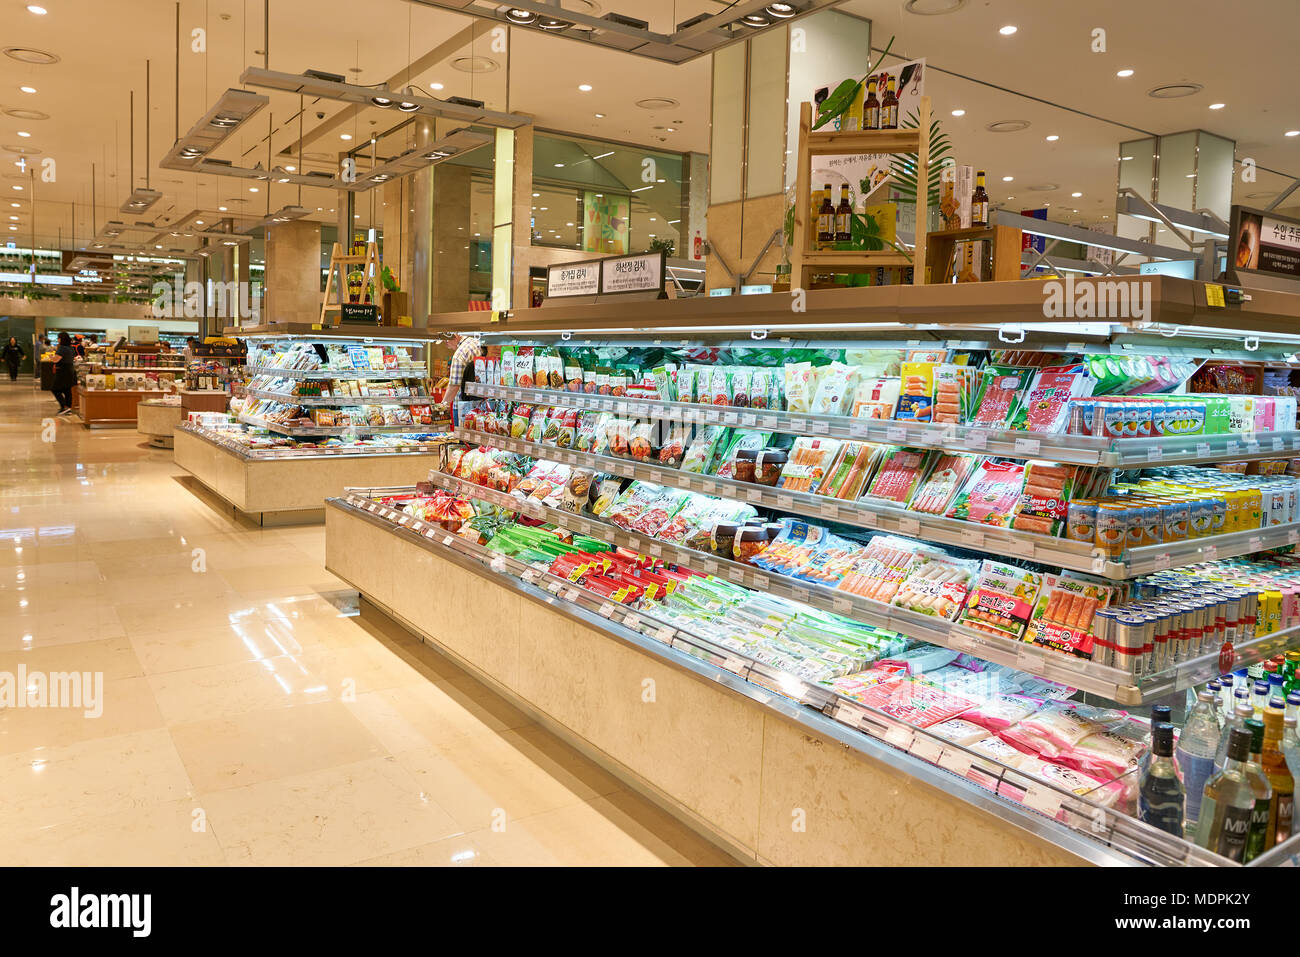 BUSAN, SOUTH KOREA - MAY 28, 2017: inside Super Market at Lotte Department Store in Busan. Stock Photo